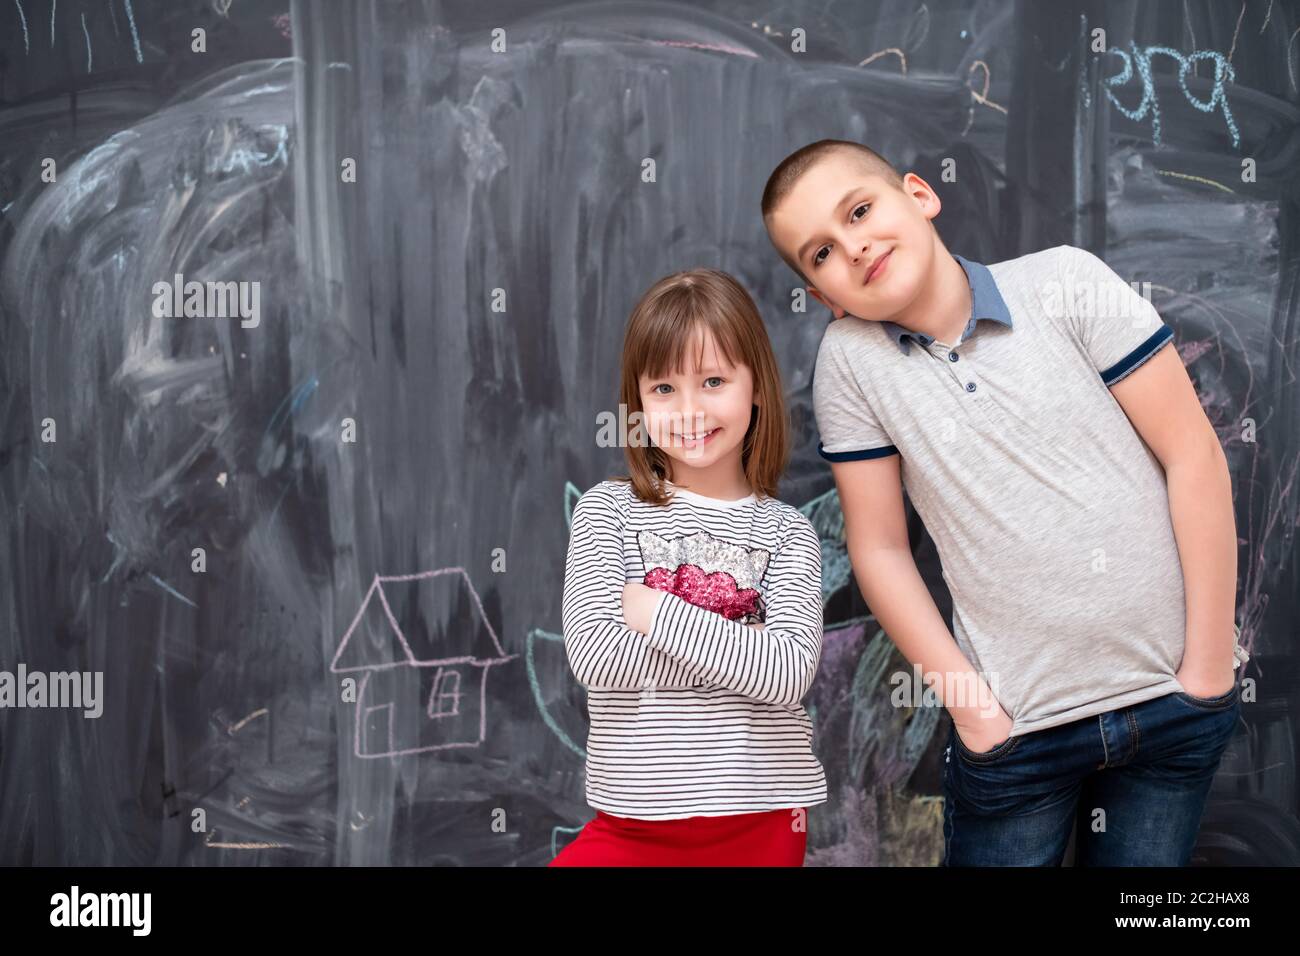 boy and little girl standing in front of chalkboard Stock Photo